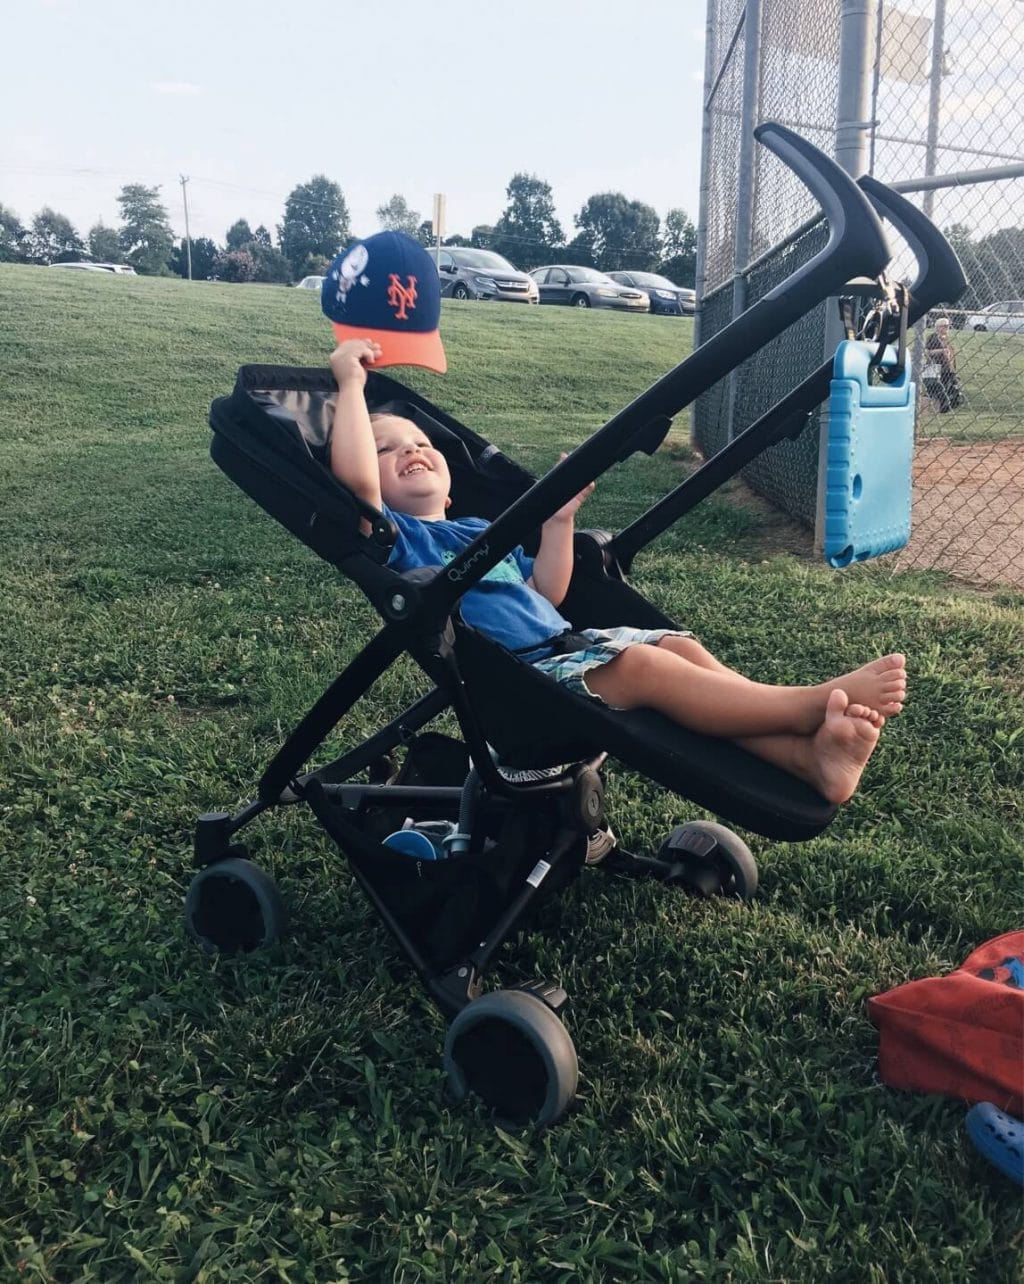 Tips for toddlers at the ball field